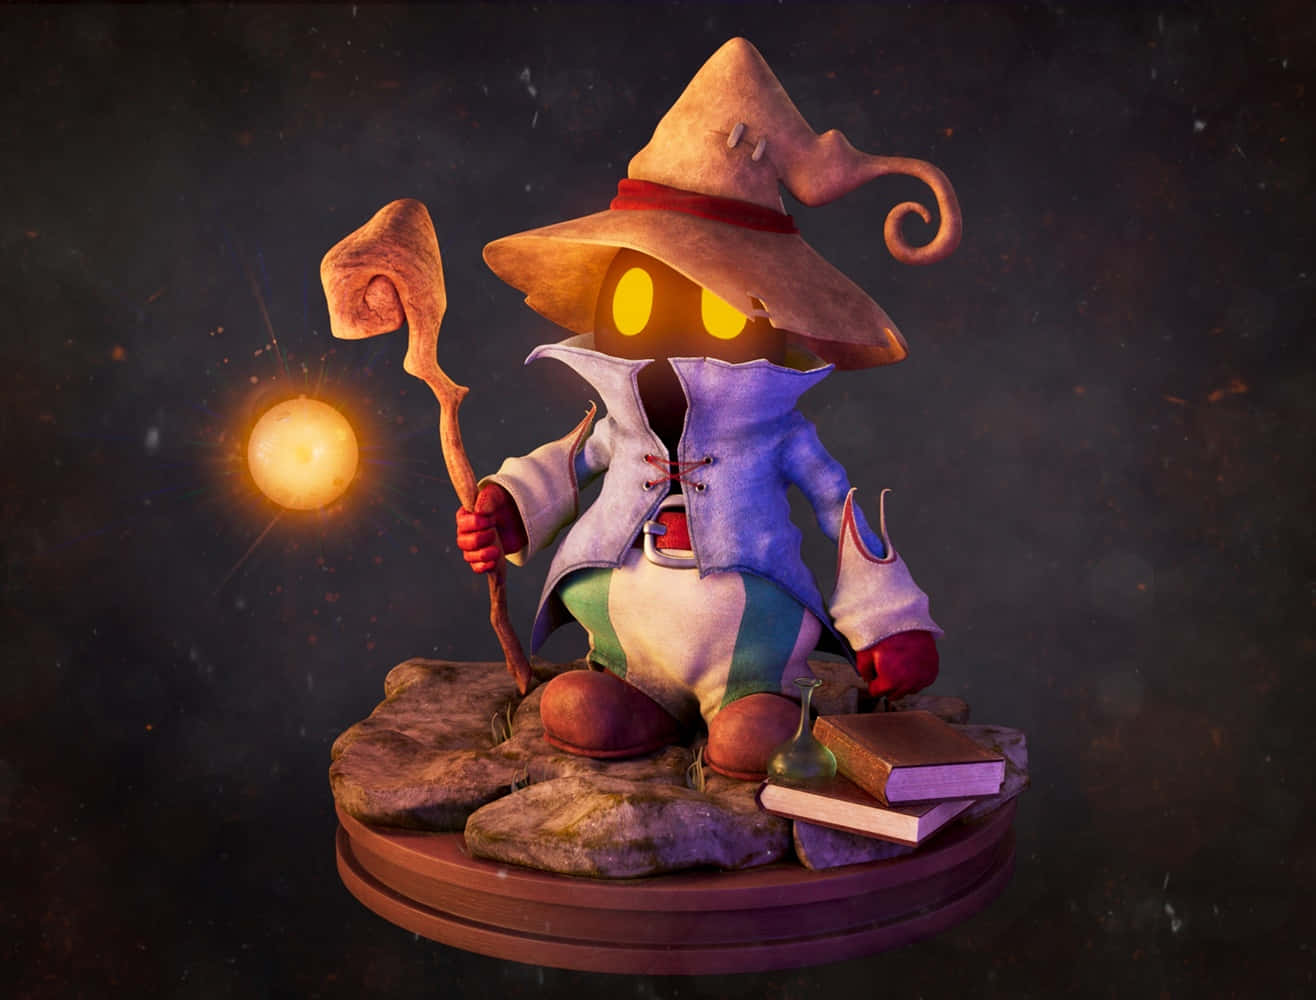 Vivi Ornitier - The Mysterious Mage From Final Fantasy Ix Wallpaper